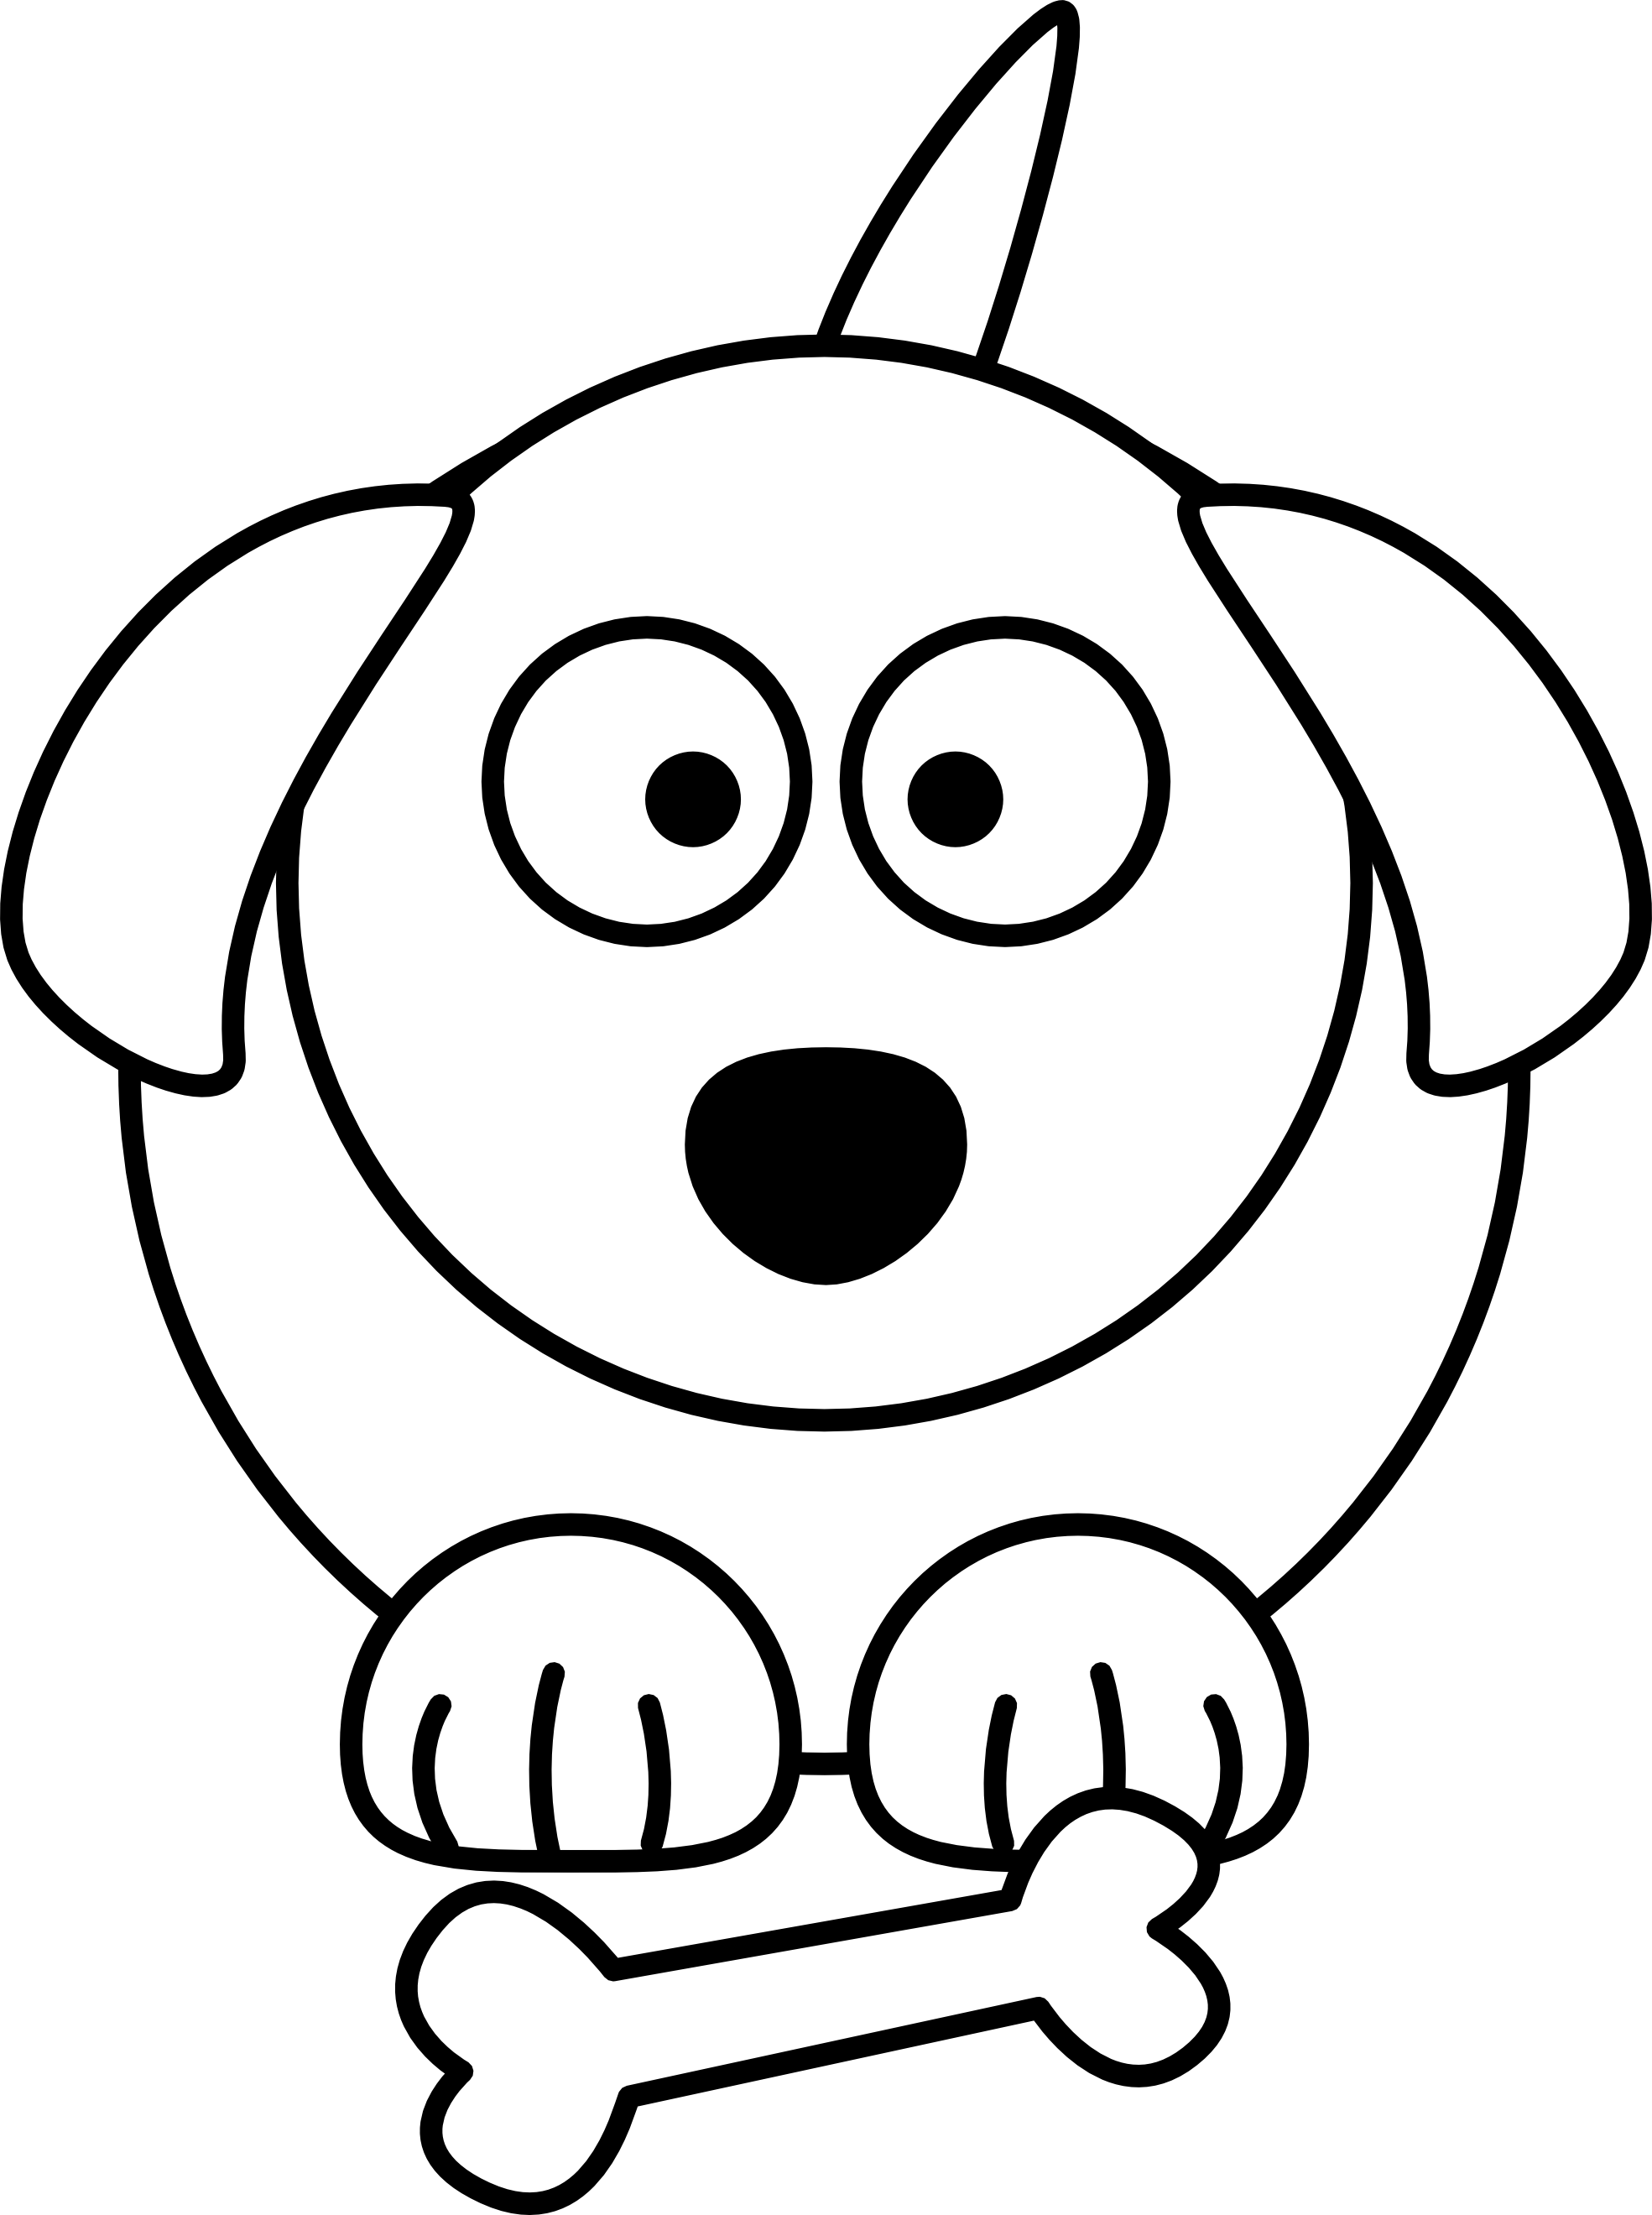 Free Drawings Of Dog Download Free Clip Art Free Clip Art On Clipart Library